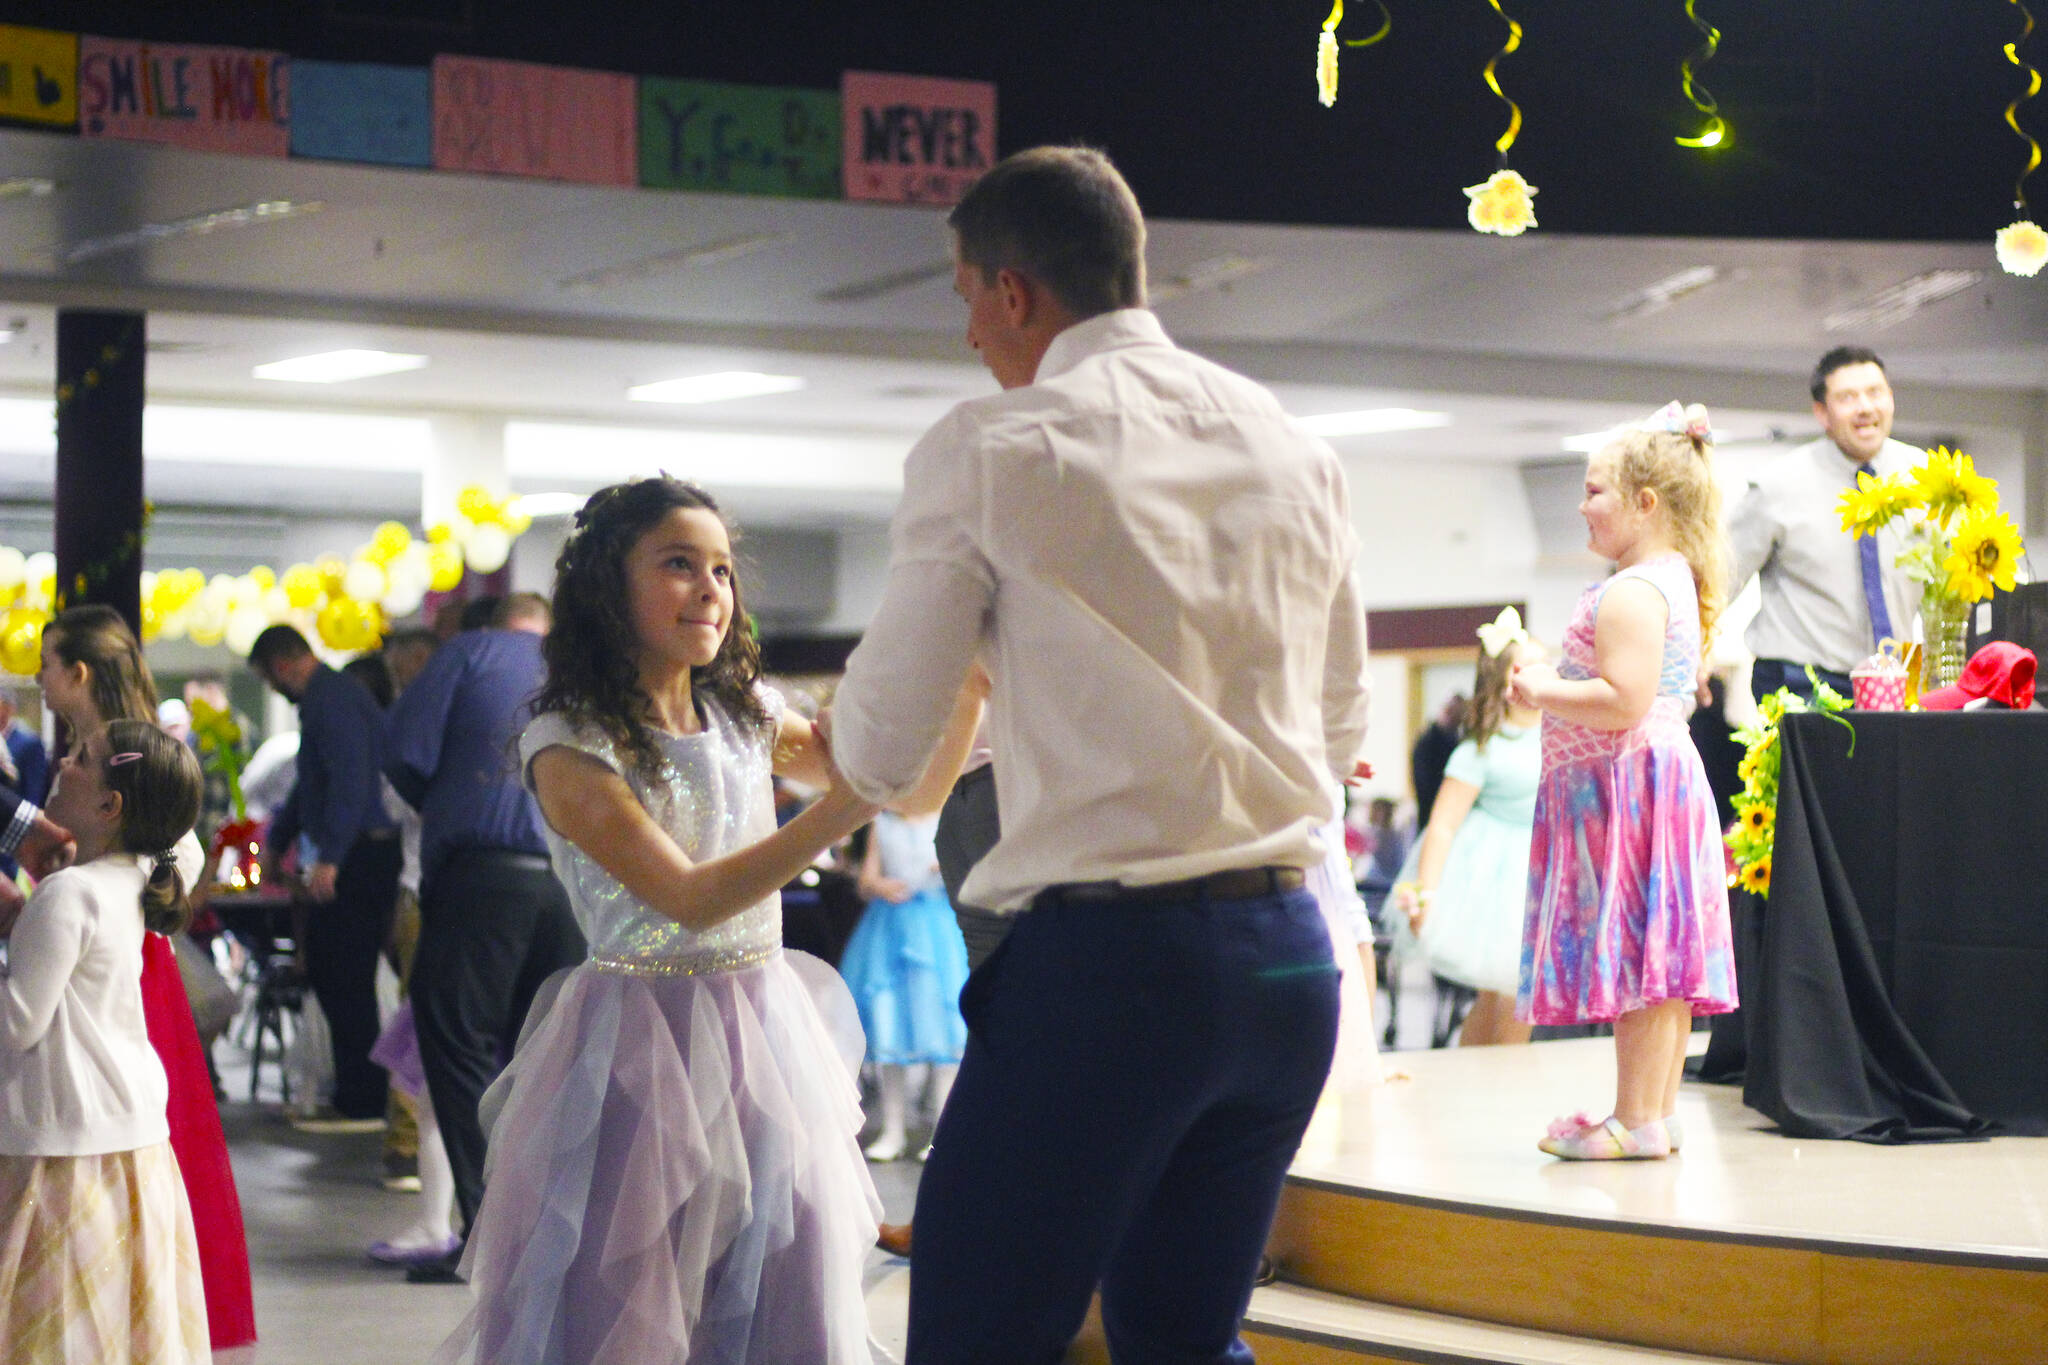 Prepare your happy feet for the Enumclaw Rotary Club’s annual Father-Daughter Dance on March 25. Here are some photos from last year’s event not previously published. Photos by Ray Miller-Still